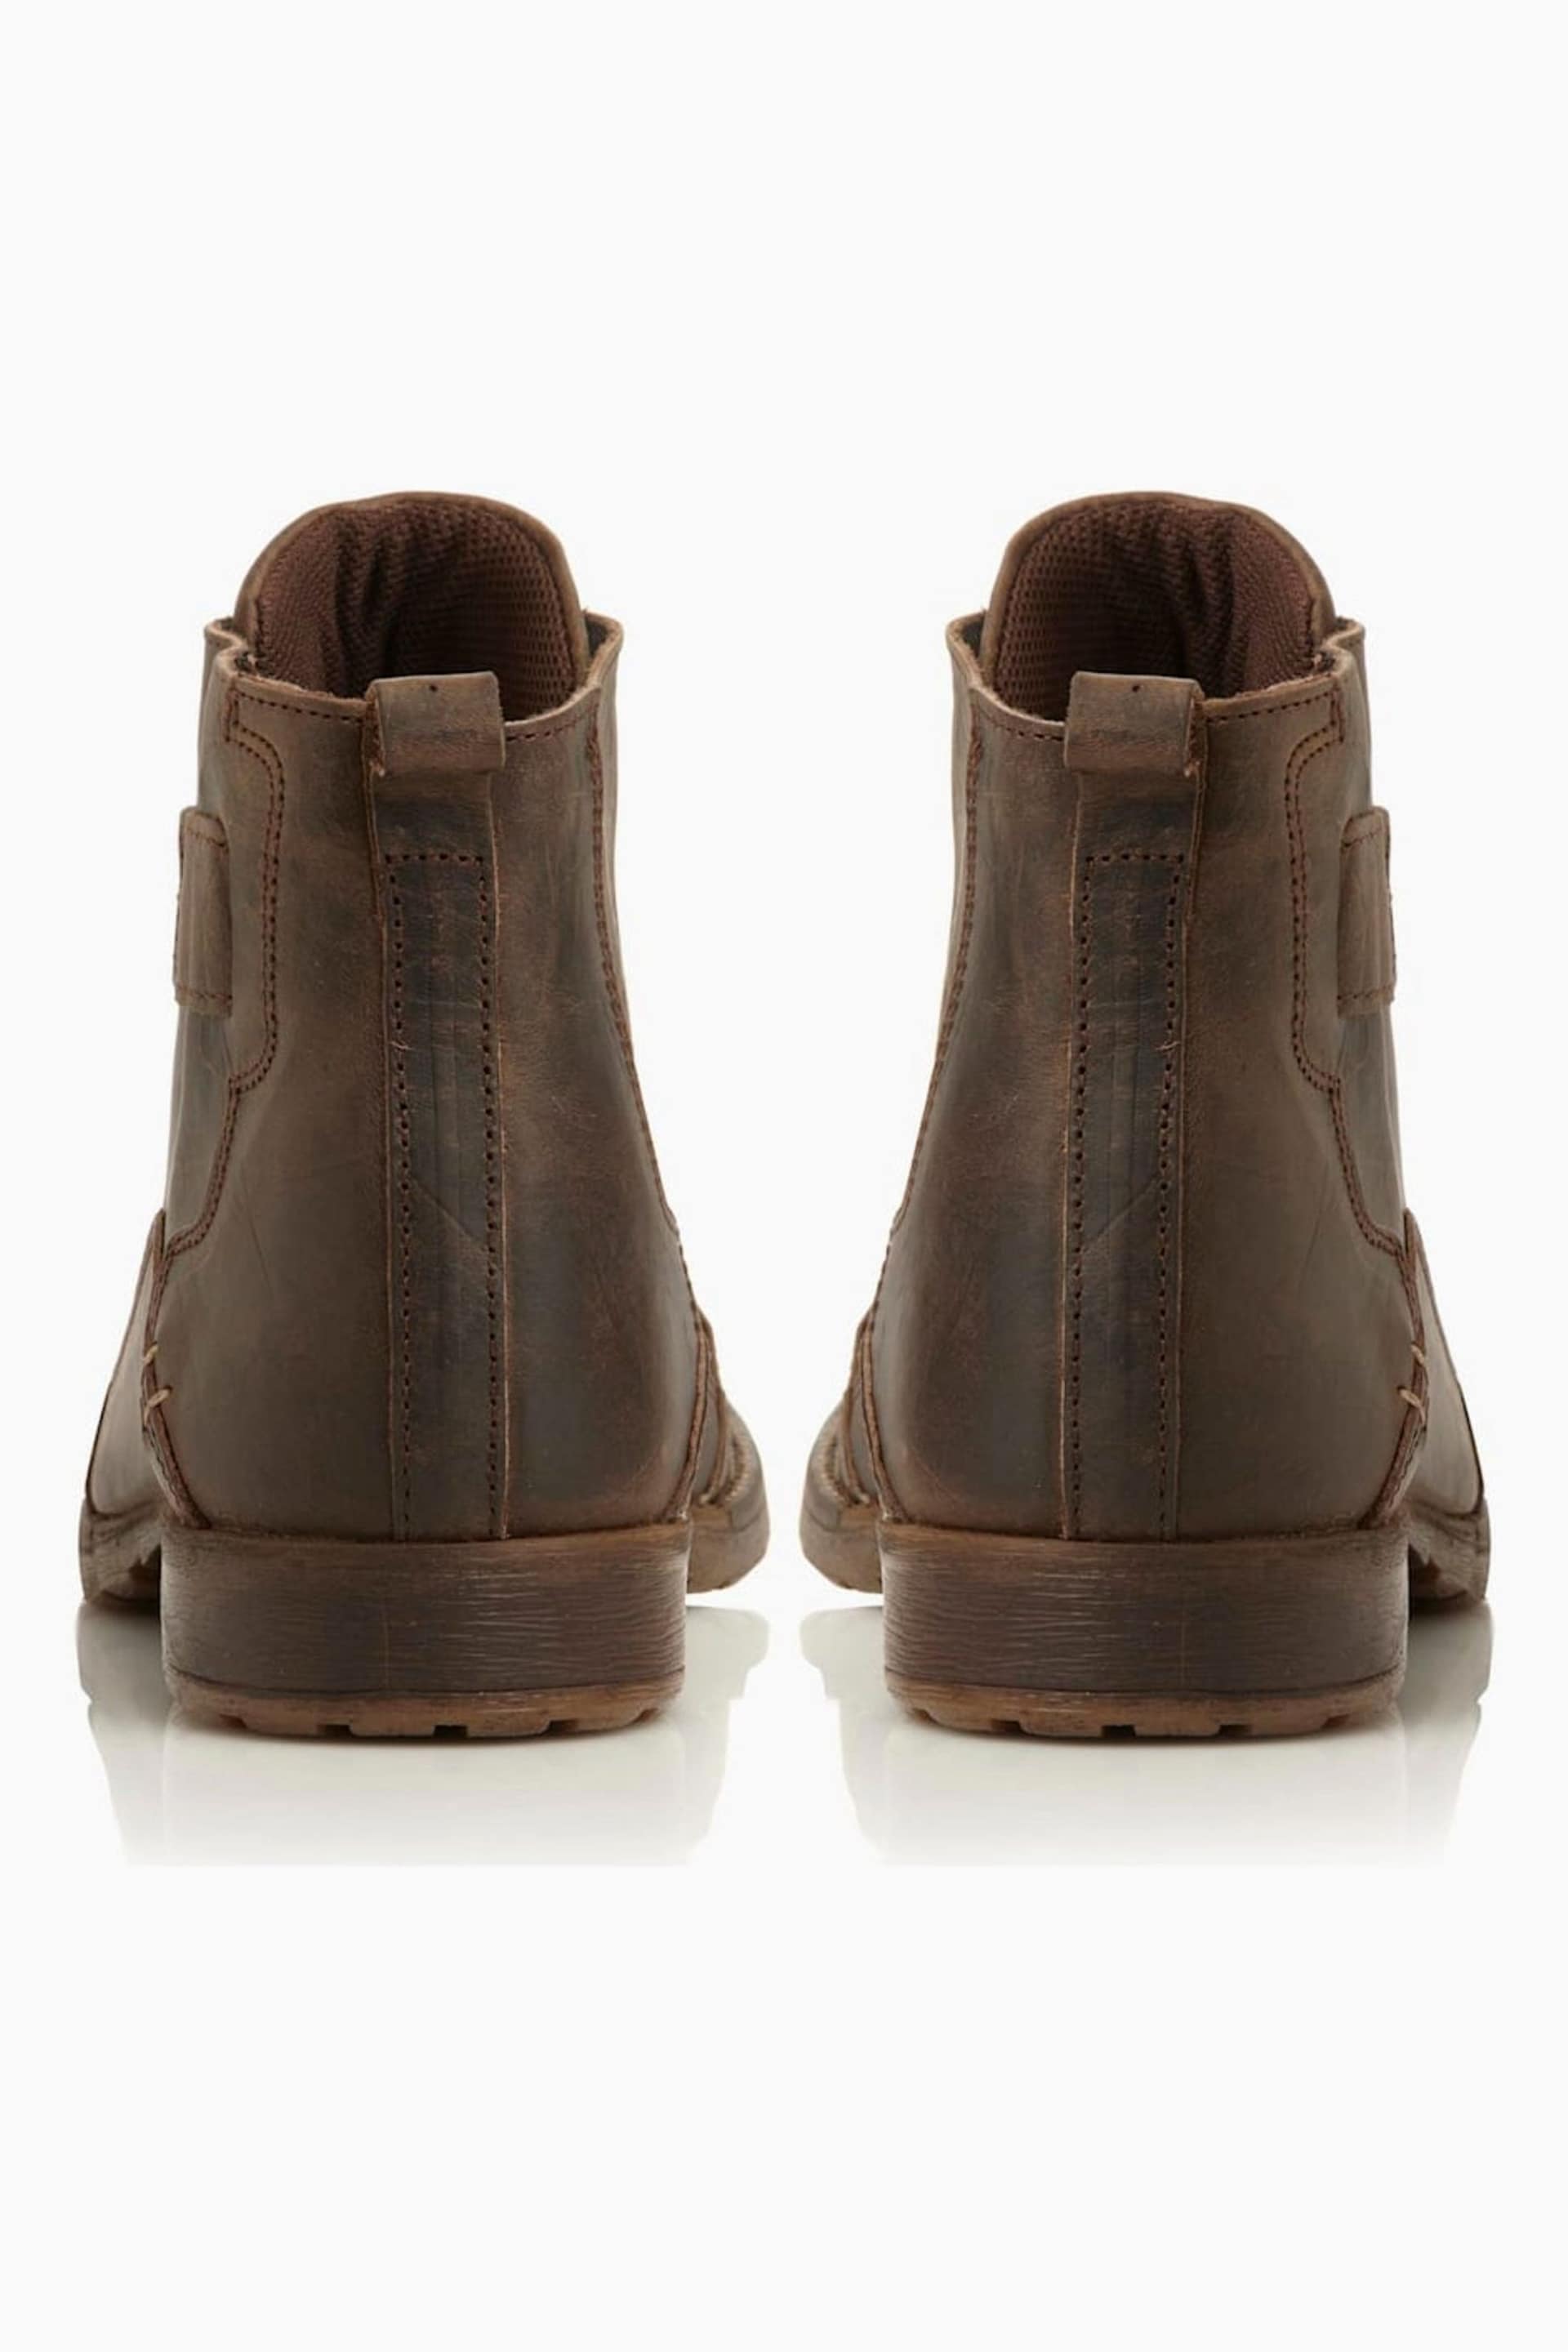 Dune London Brown Heavy Duty Leather Simon Ankle Boots - Image 4 of 6